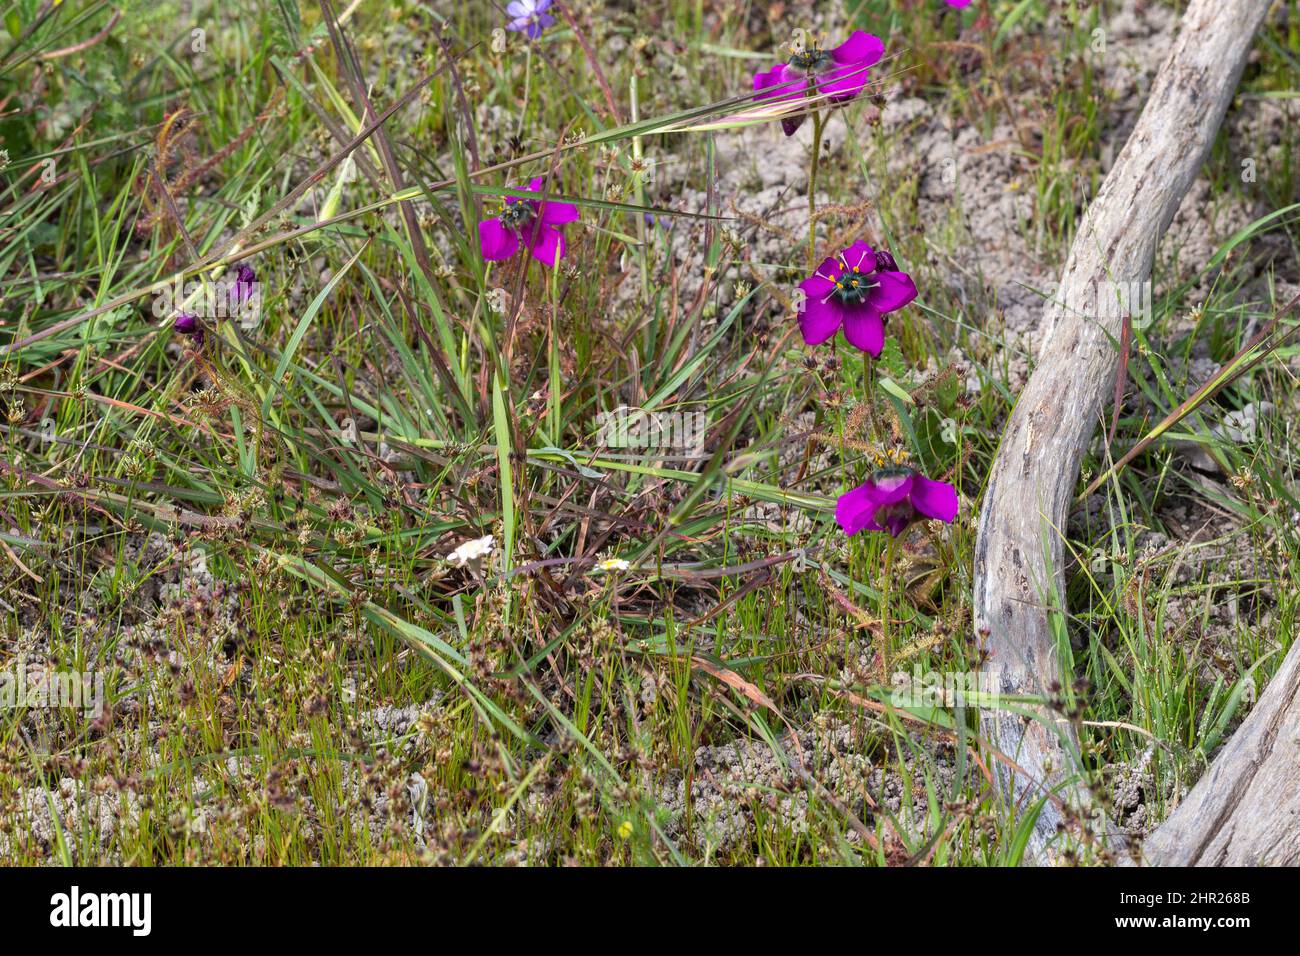 The purple flowered form of the Sundew Drosera cistiflora in natural habitat near Malmesbury in the Western Cape of South Africa Stock Photo